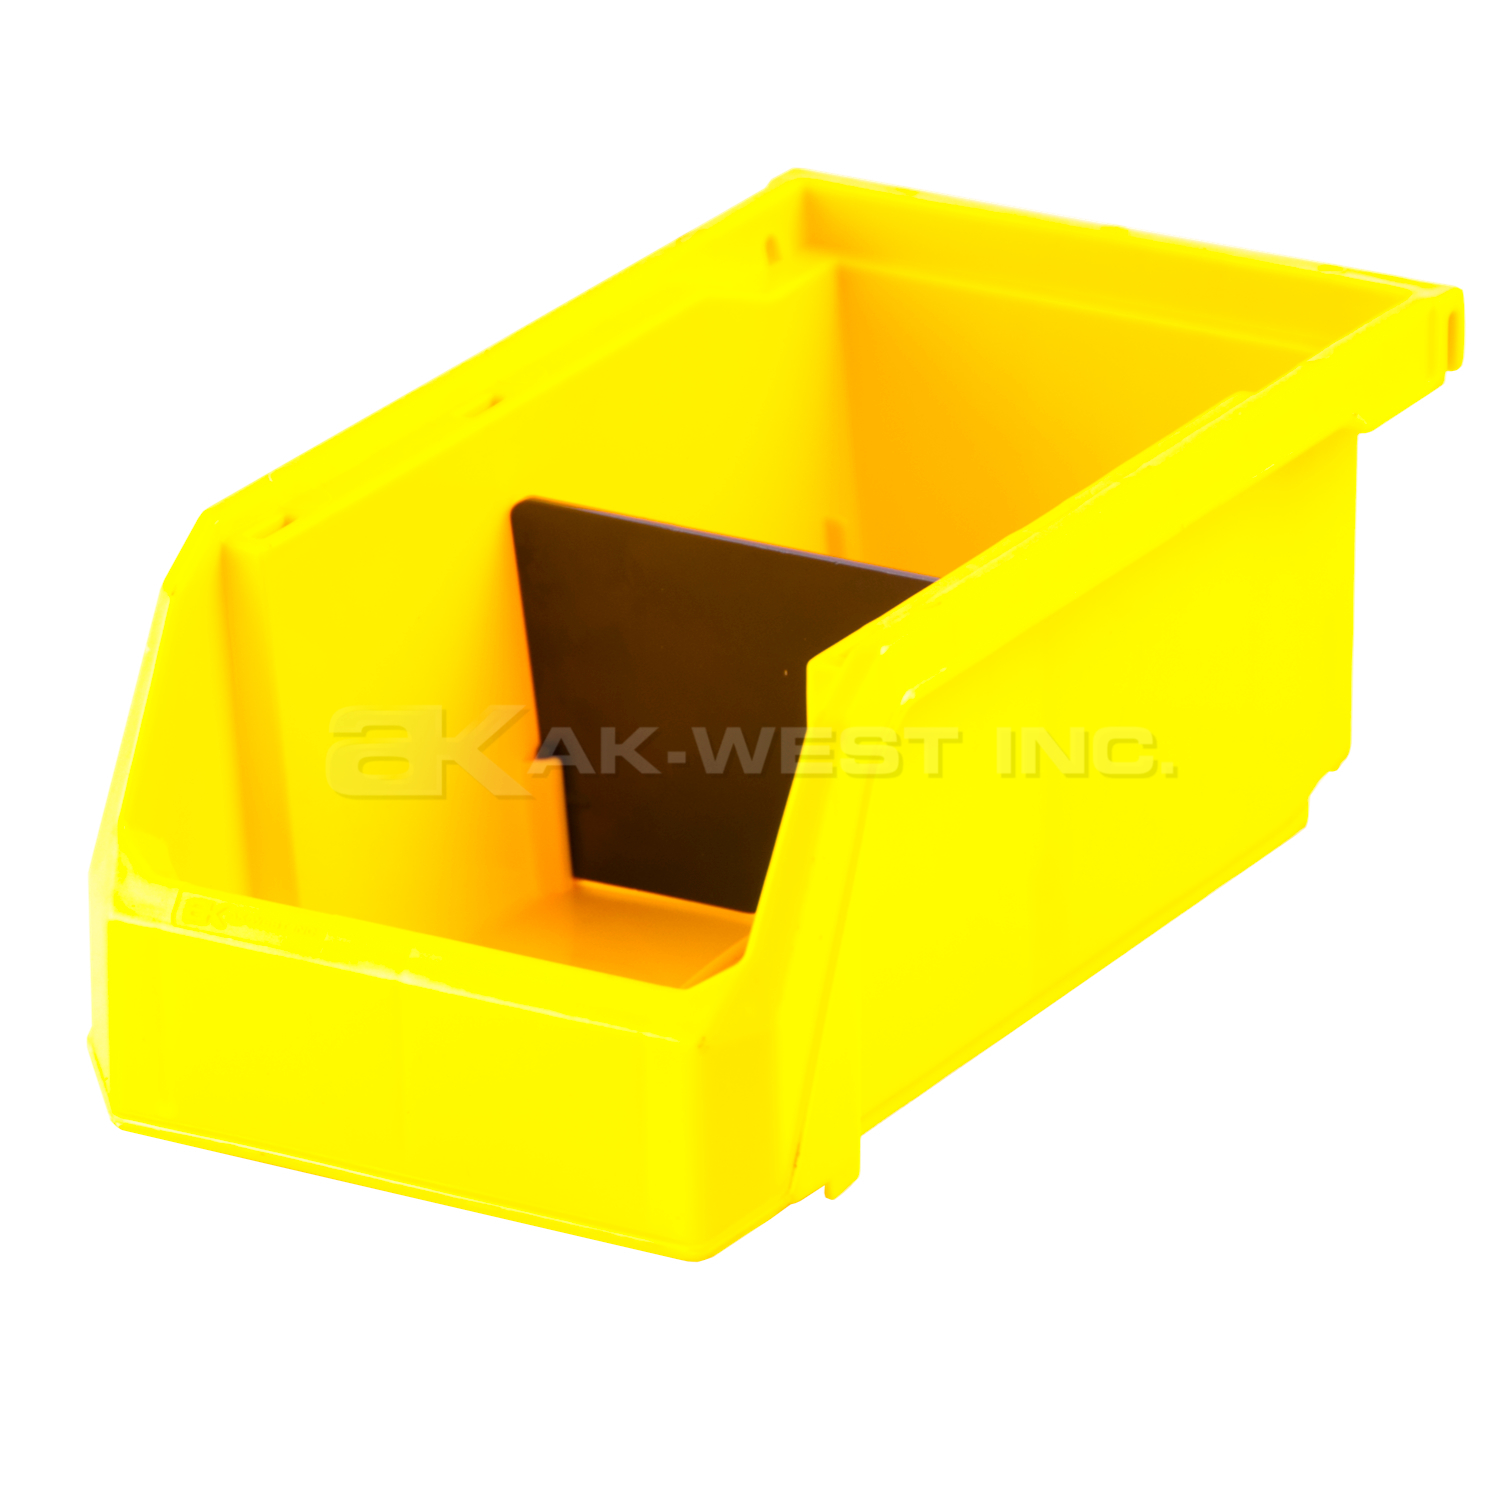 Yellow, 7-3/8" x 4-1/8" x 3" Hanging, Stacking and Nesting Bin (Equivalent Size To 30220)